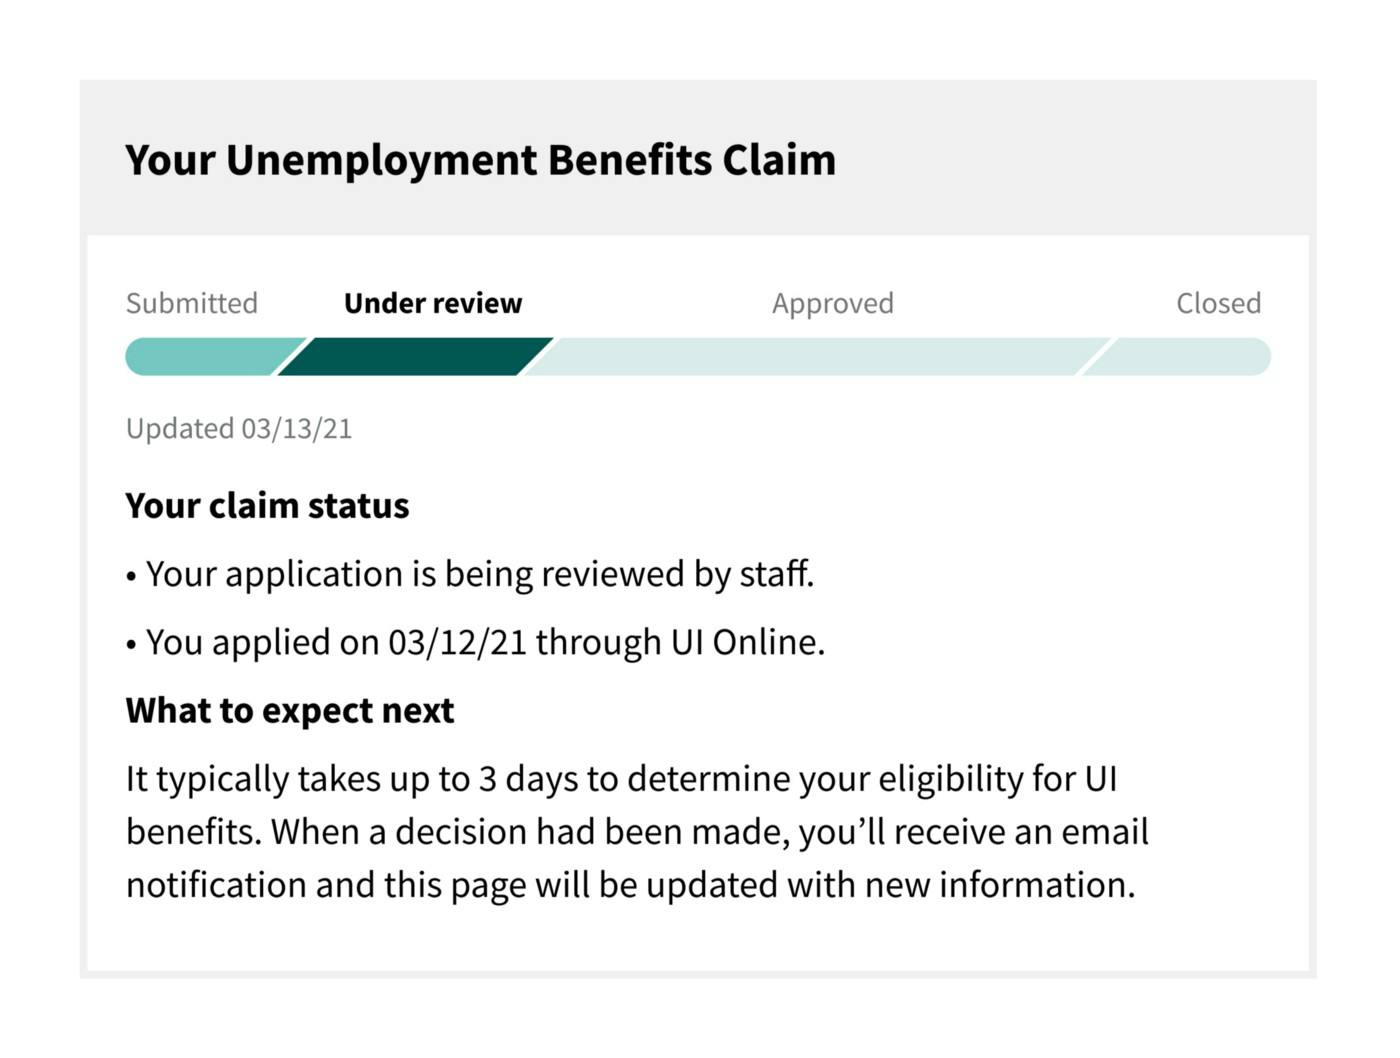 A screenshot of a message communicating to a person the status of their unemployment claim, including a progress bar and explanation.